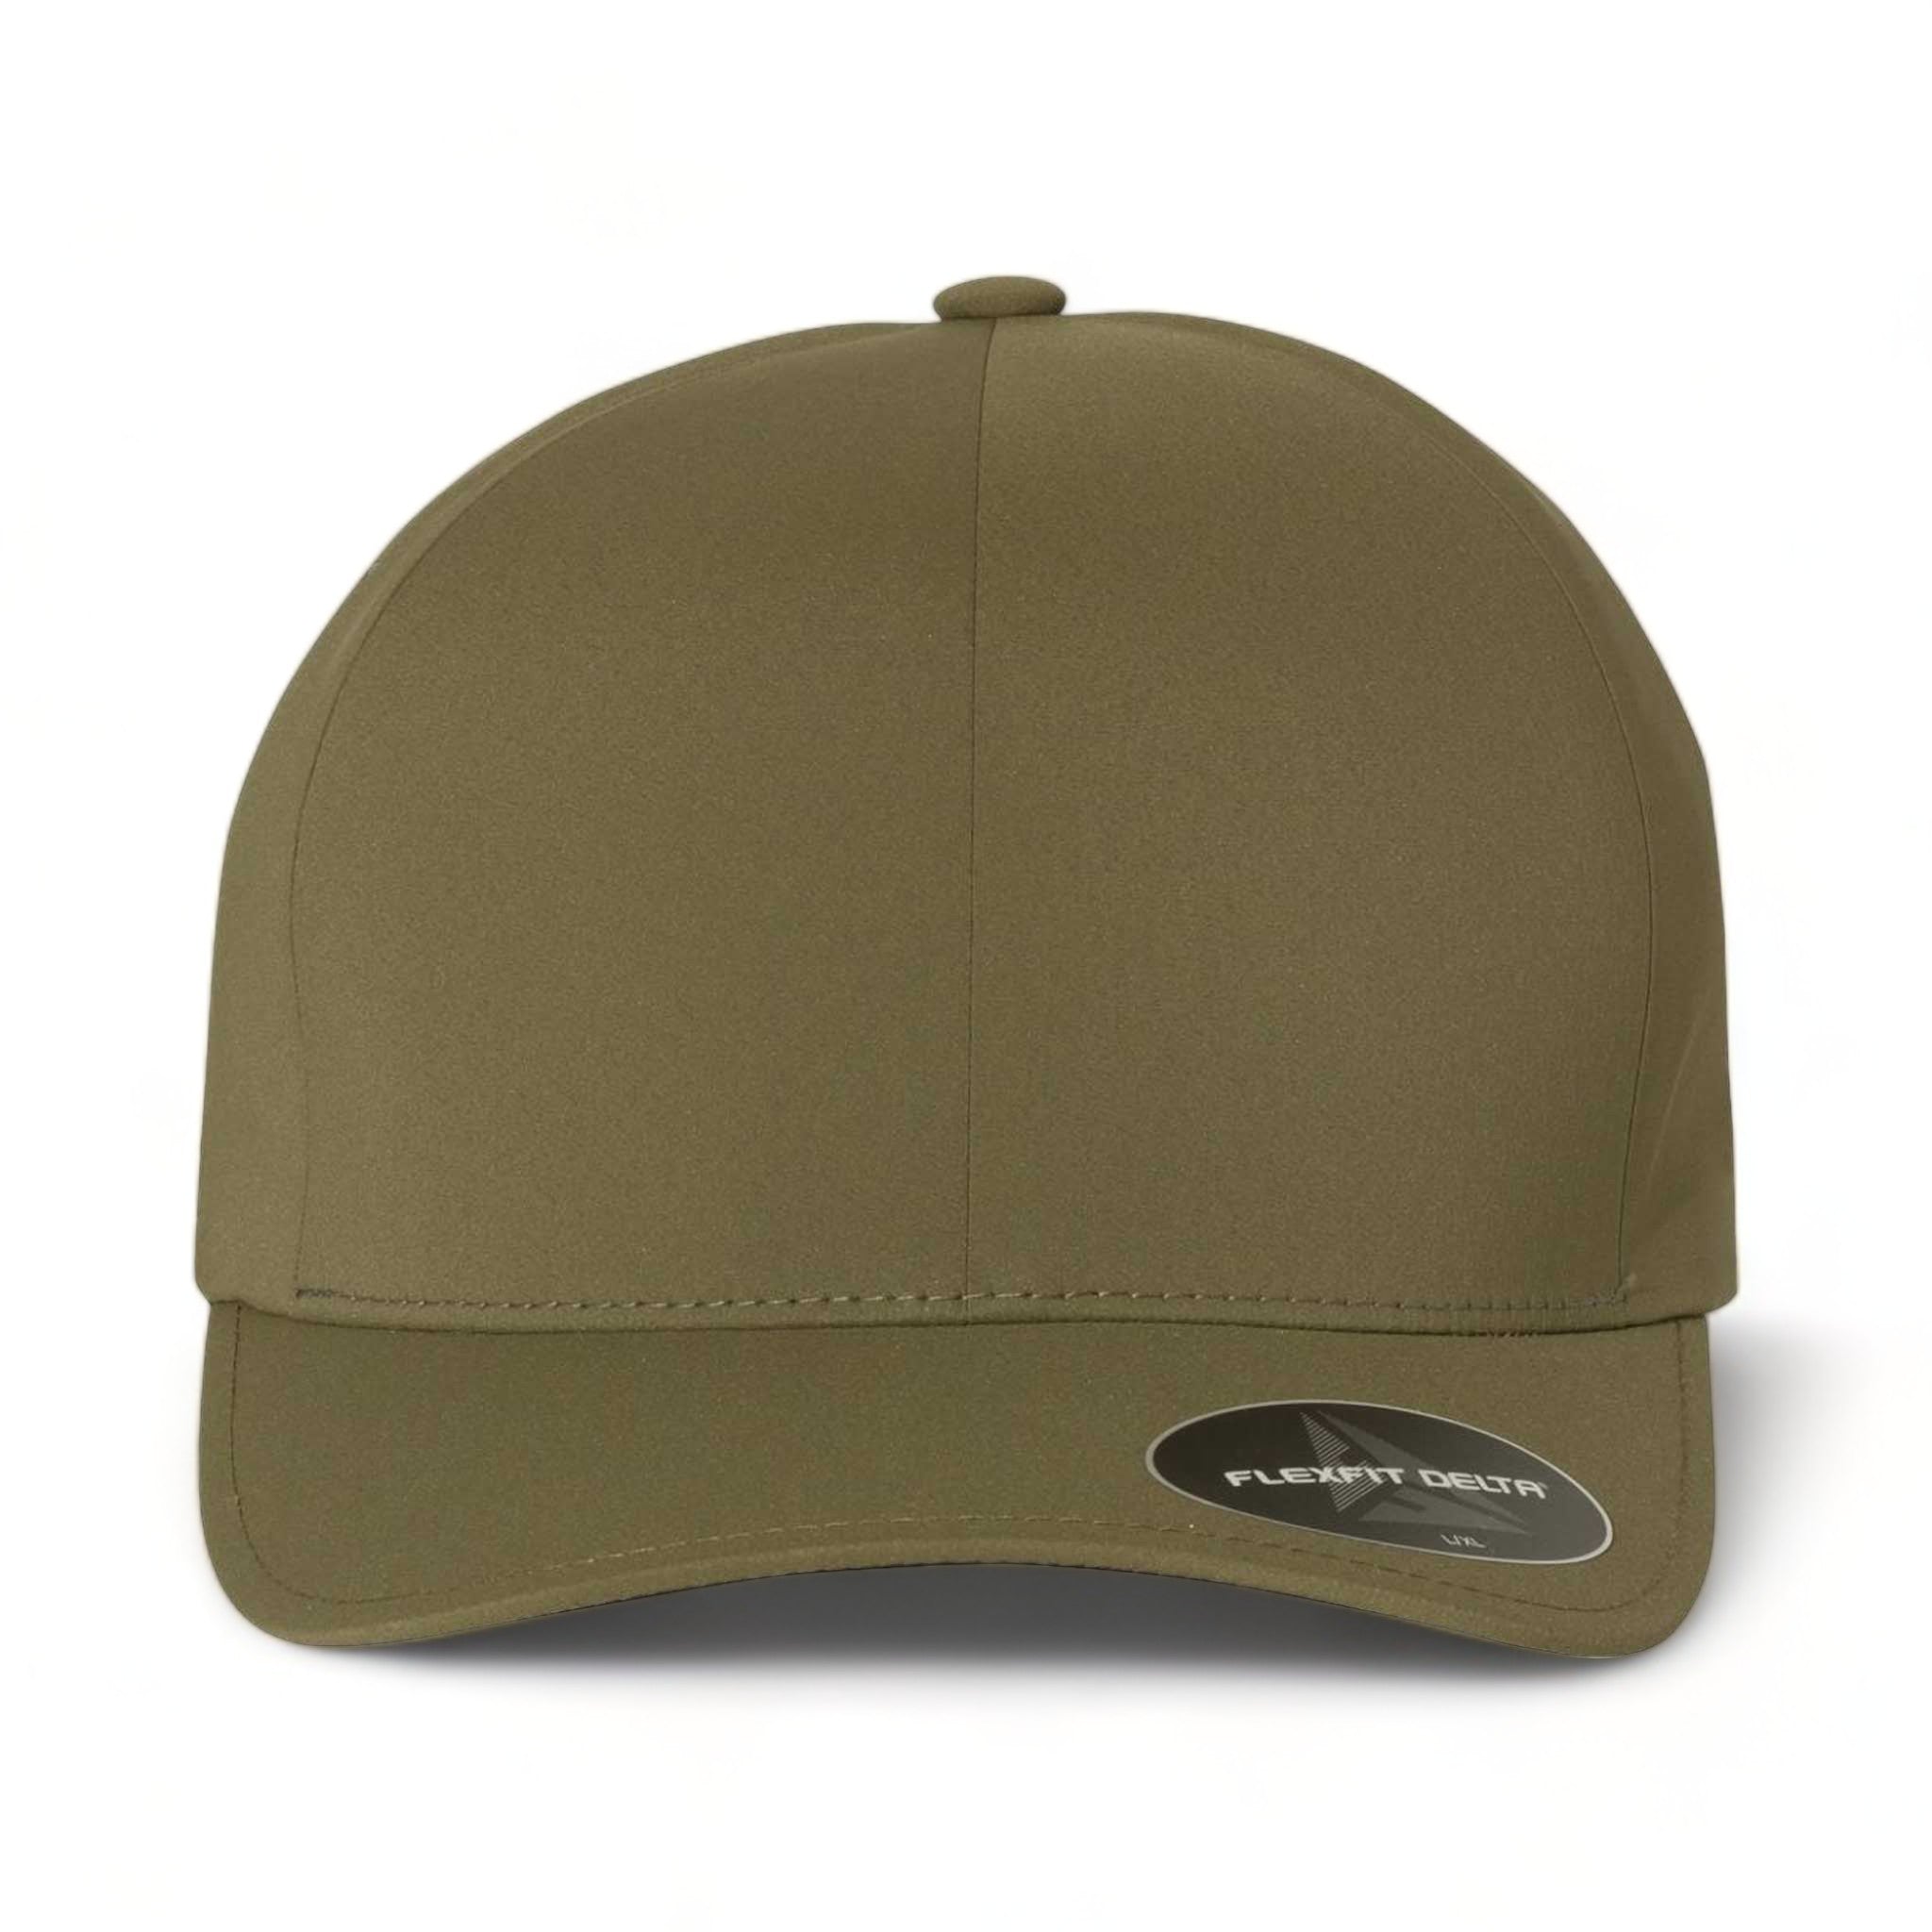 Front view of Flexfit 180 custom hat in olive